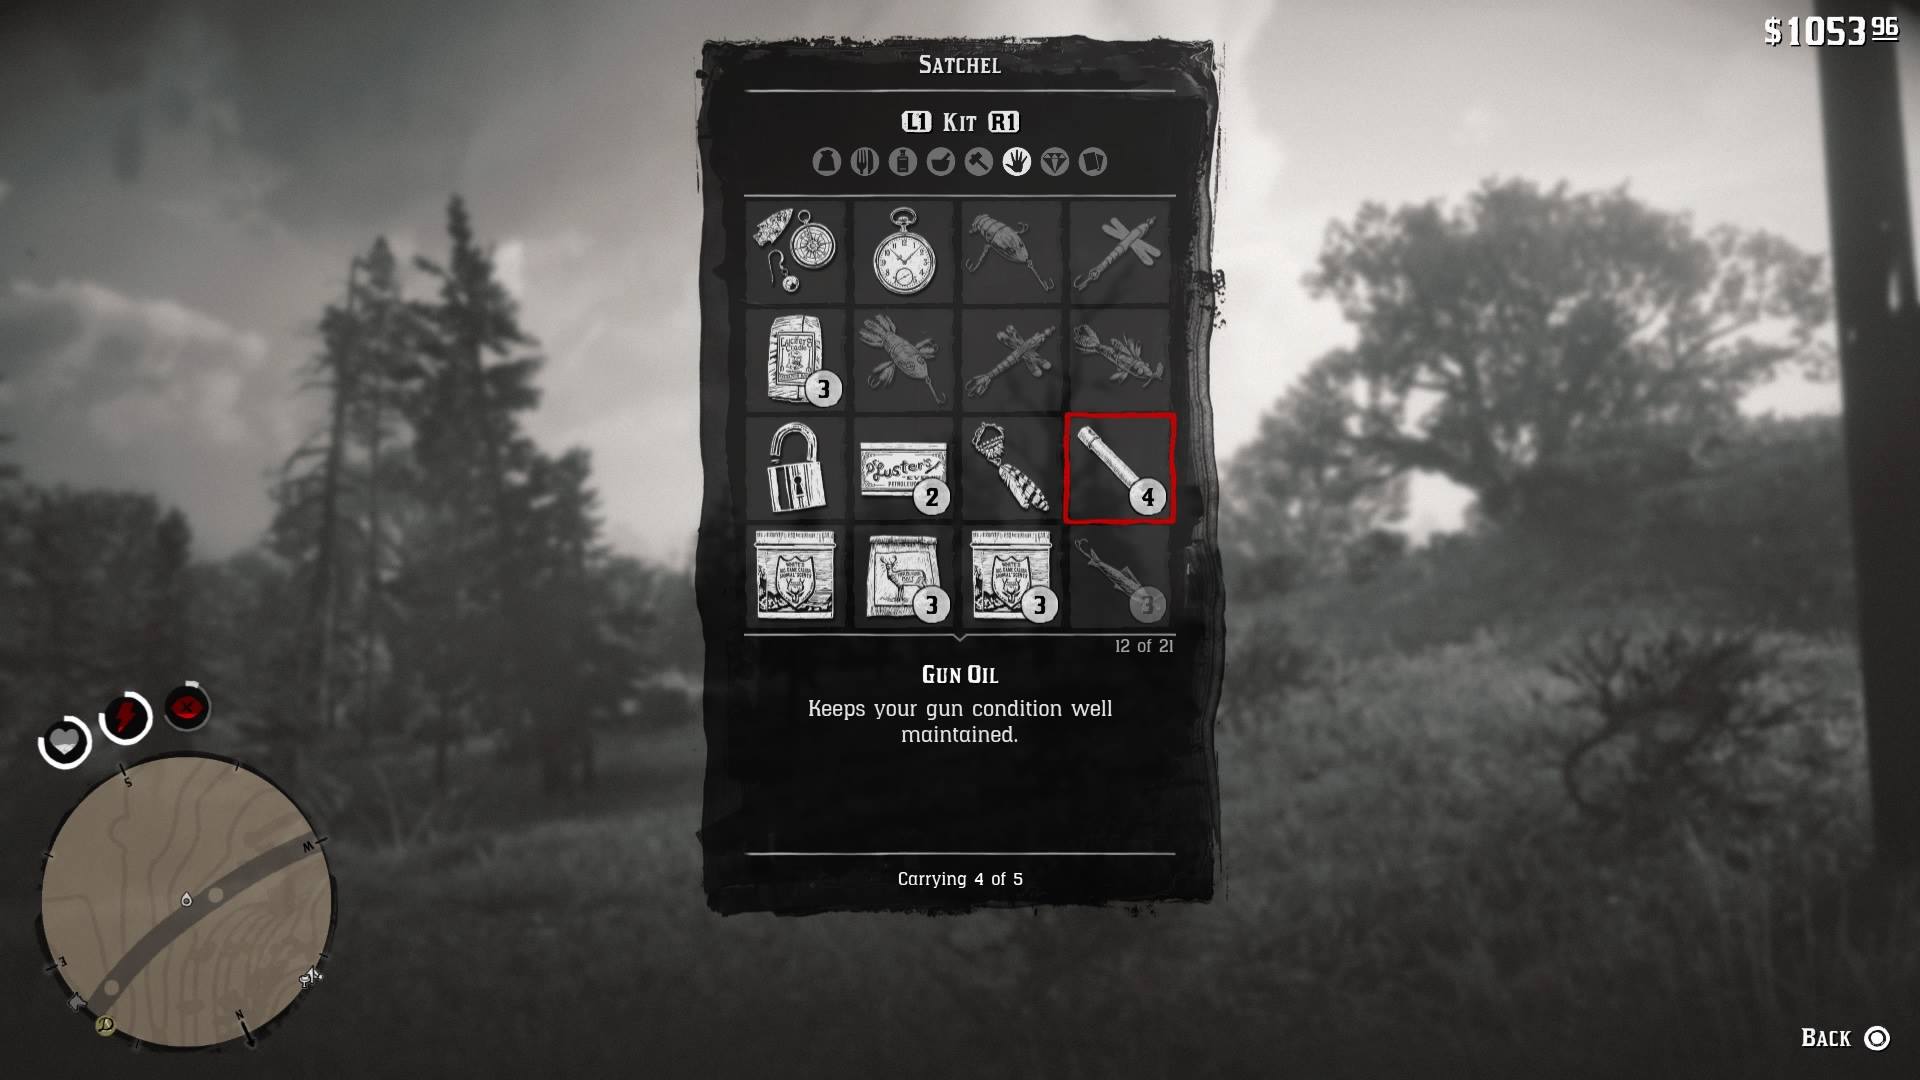 In Red Dead Redemption 2, Gun Oil is stored in the satchel's "Kit" section.